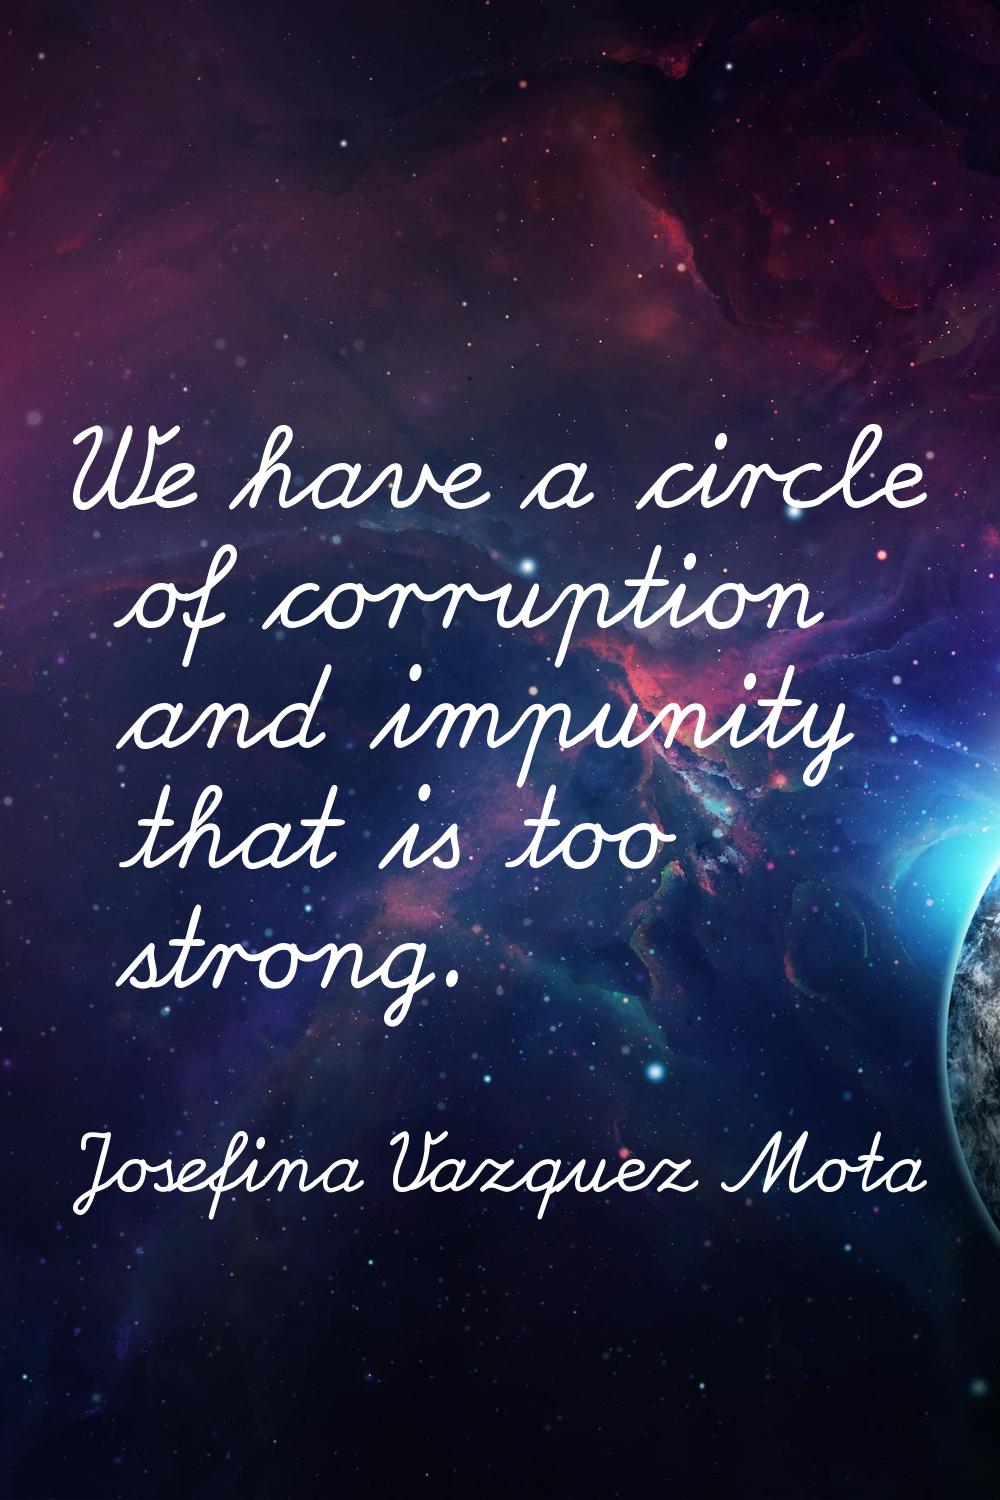 We have a circle of corruption and impunity that is too strong.